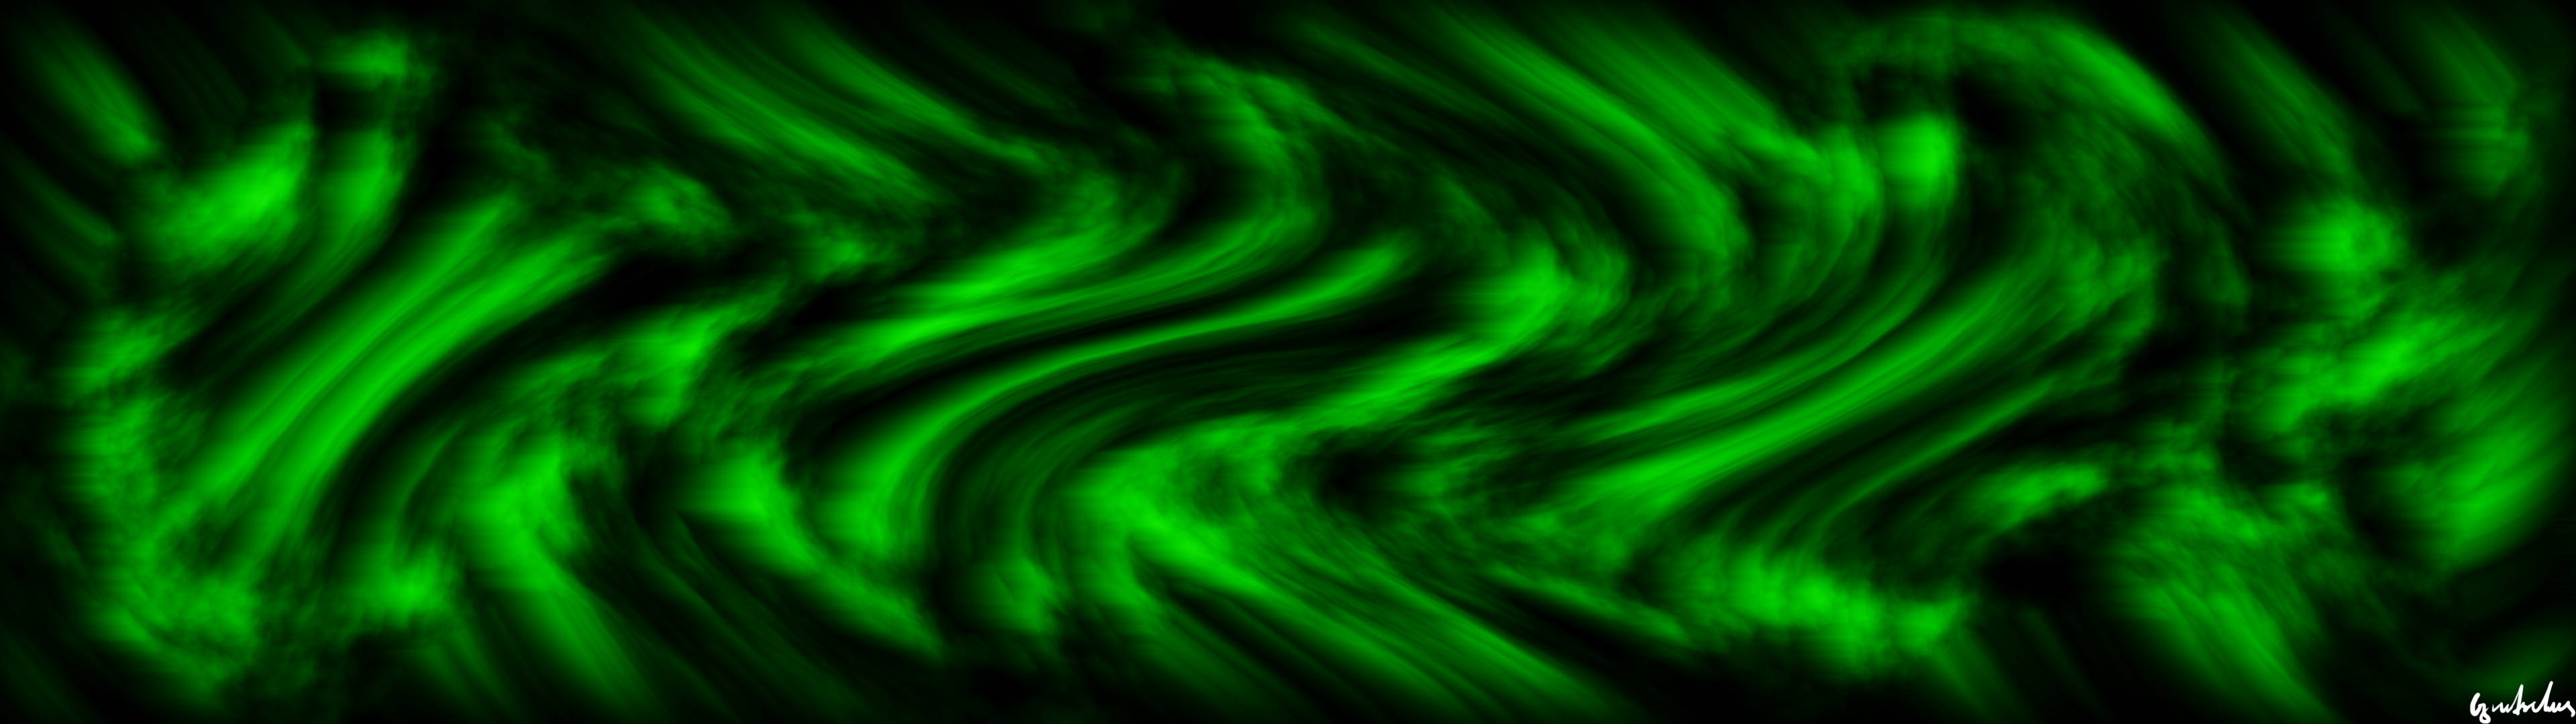 Black And Green Wavy Vertical Background